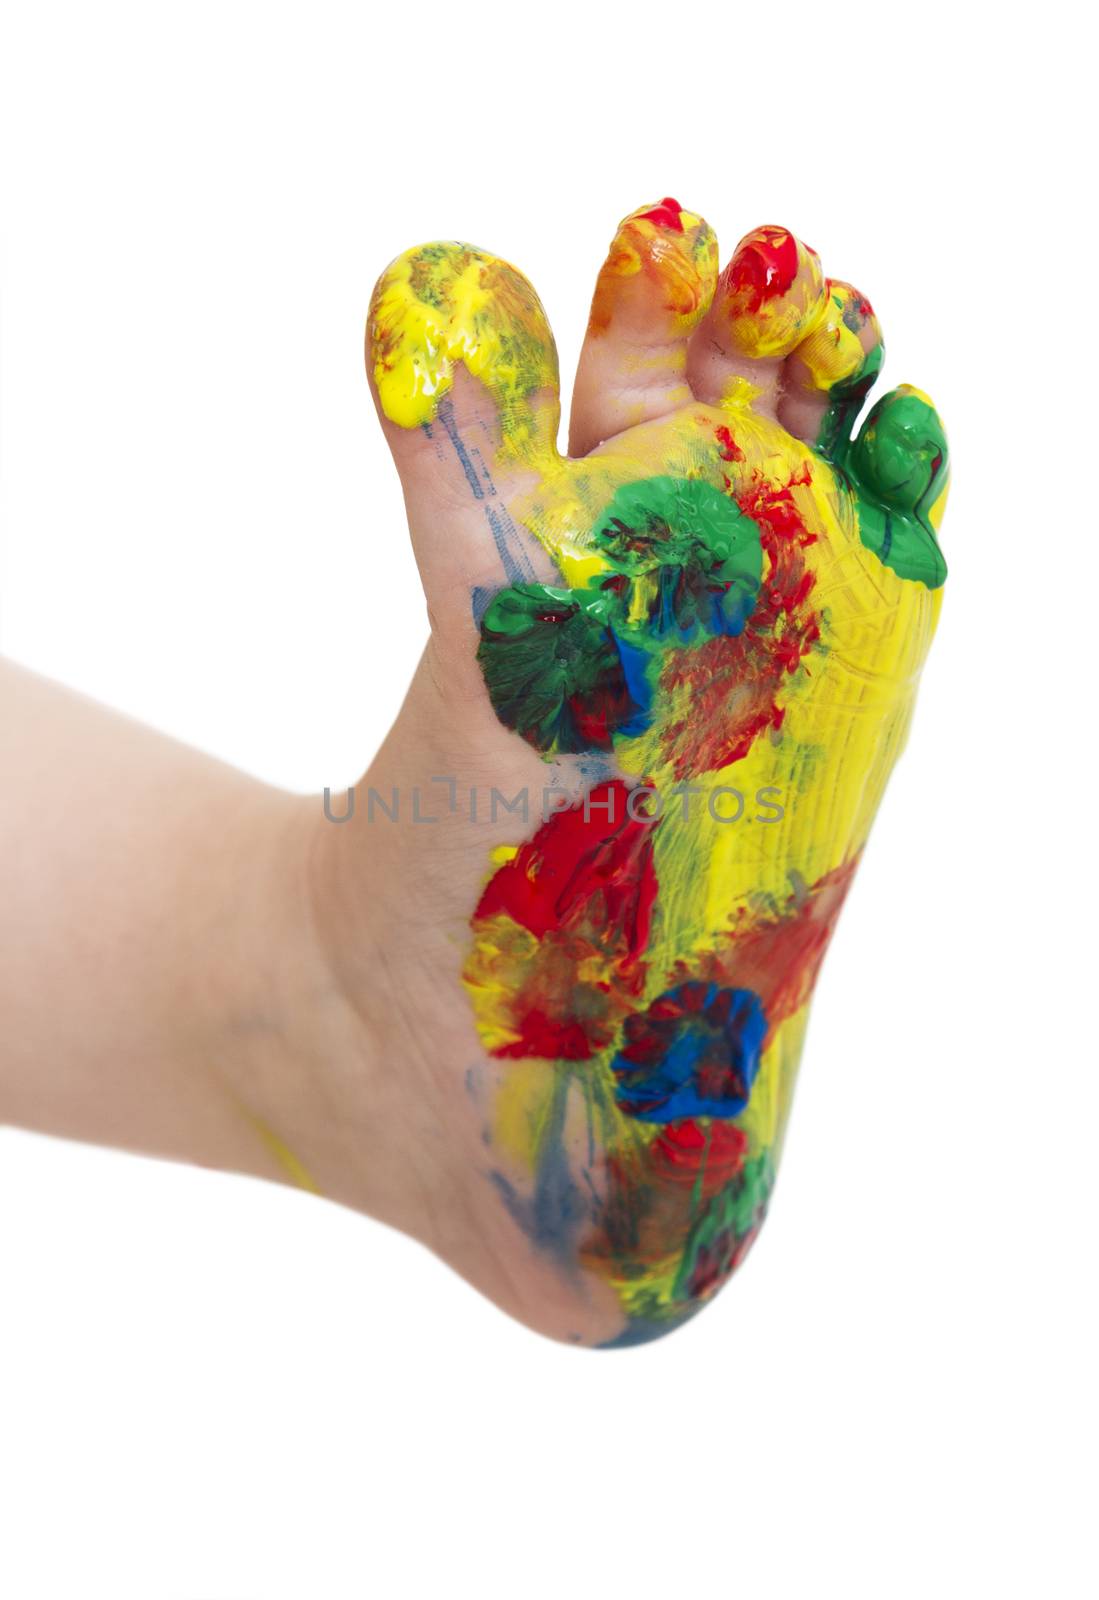 painted feet from young child isolated in white bachground